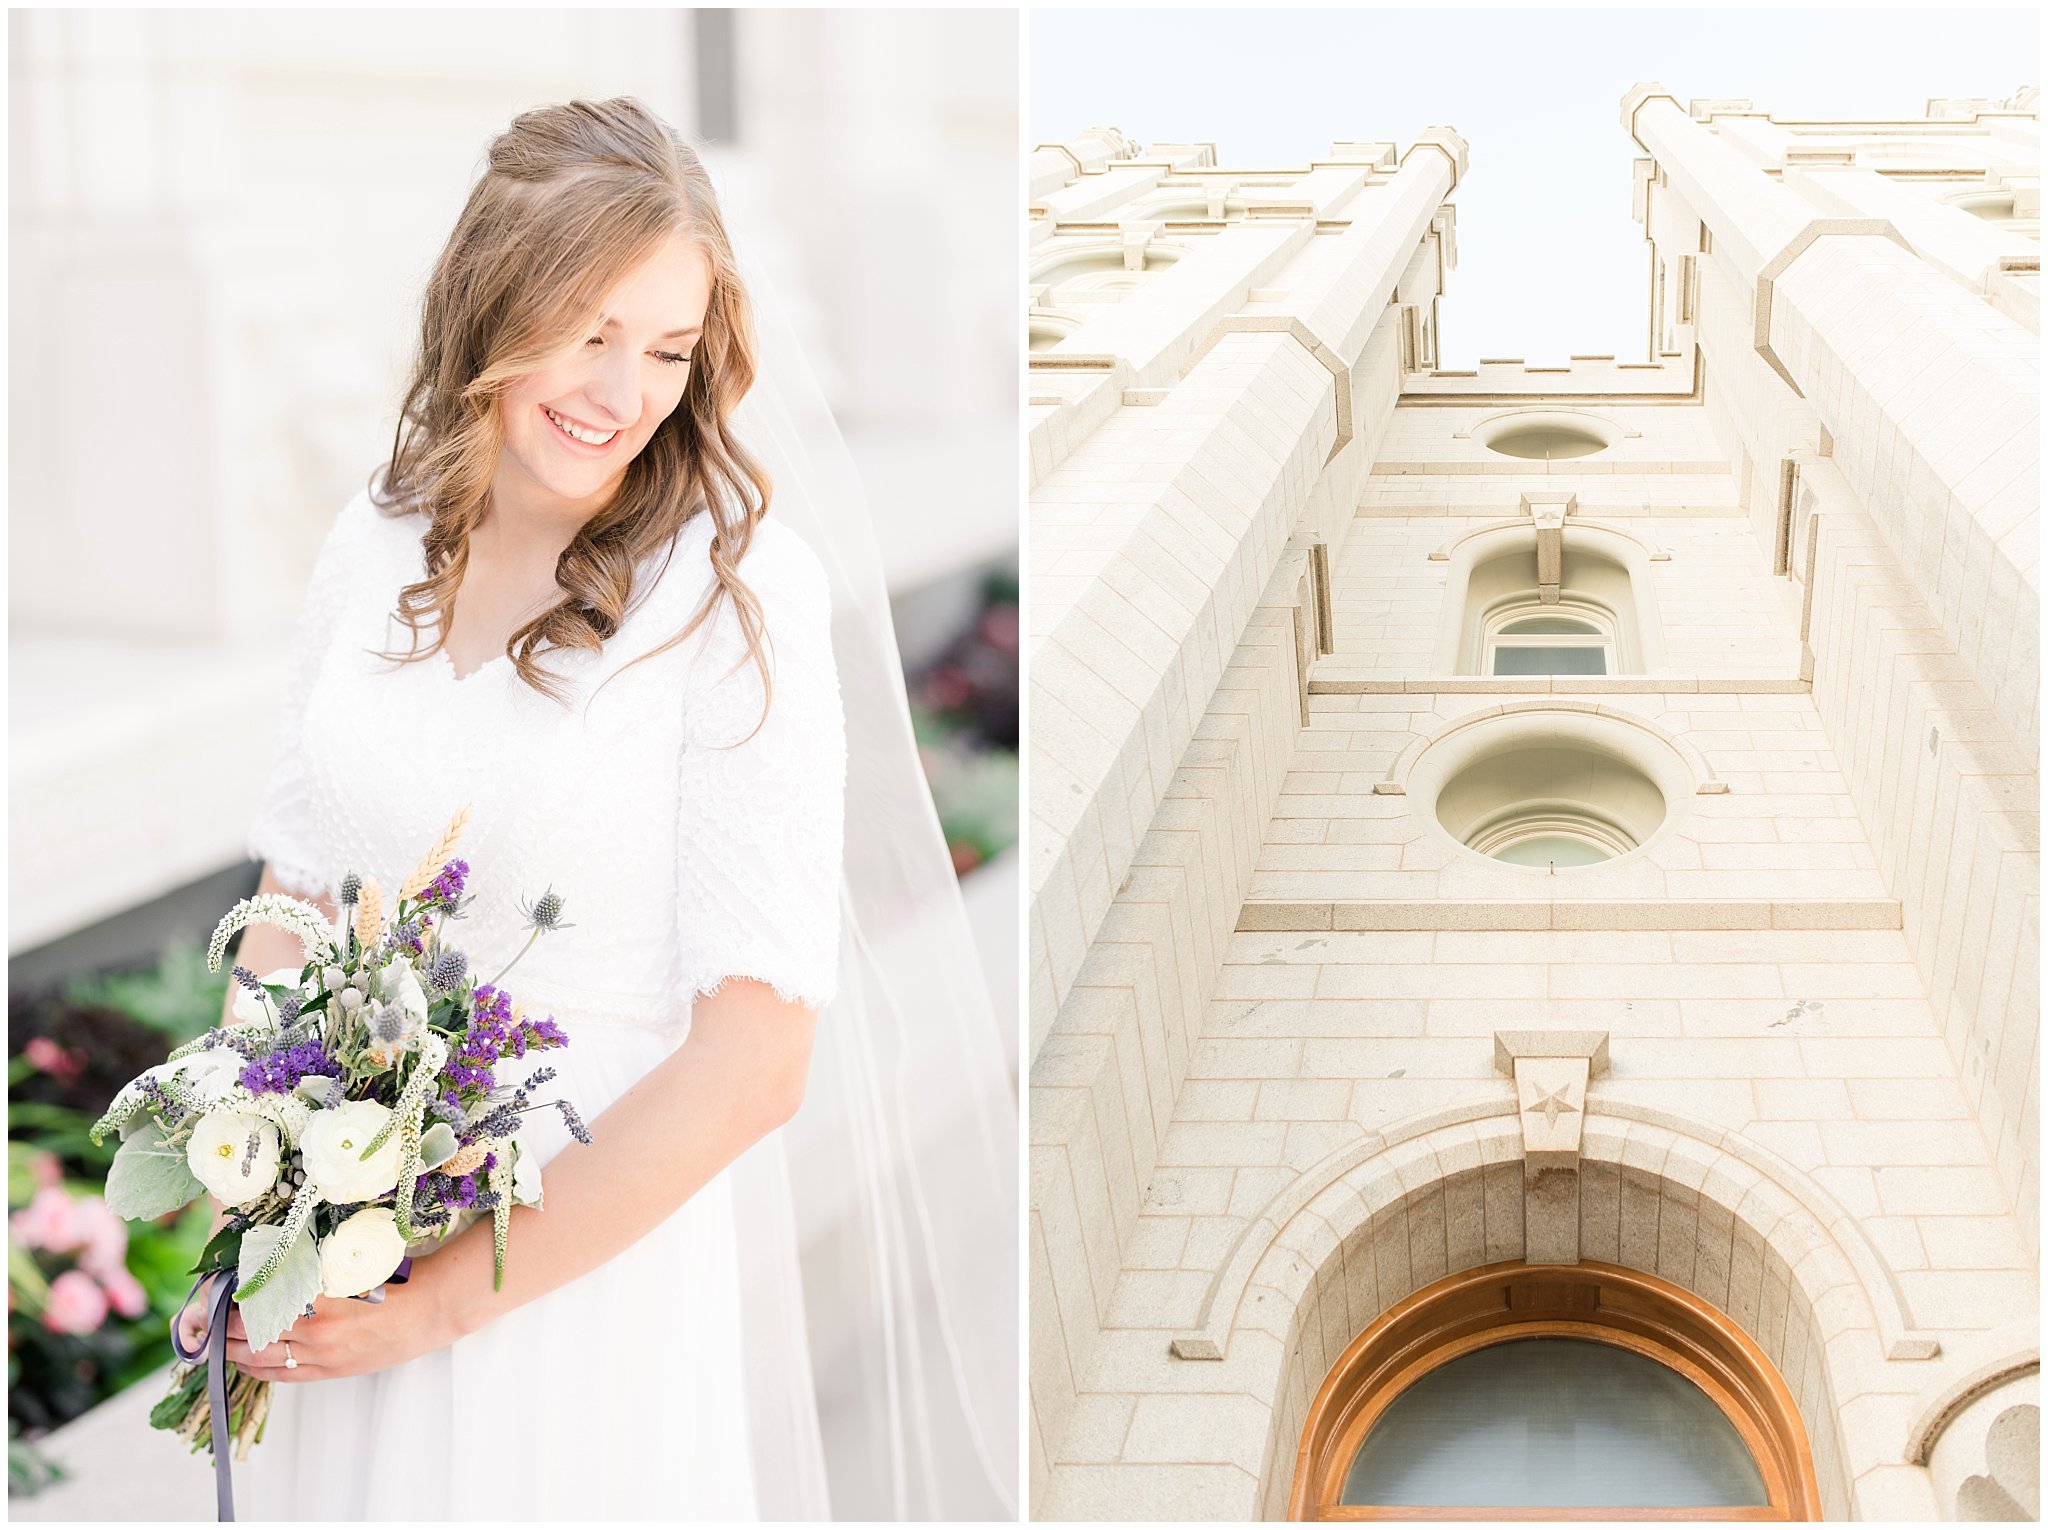 Bride in simple elegant dress with lavender bouquet | Salt Lake Temple Wedding and Clearfield City Hall Reception | Utah Wedding Photographers | Jessie and Dallin Photography